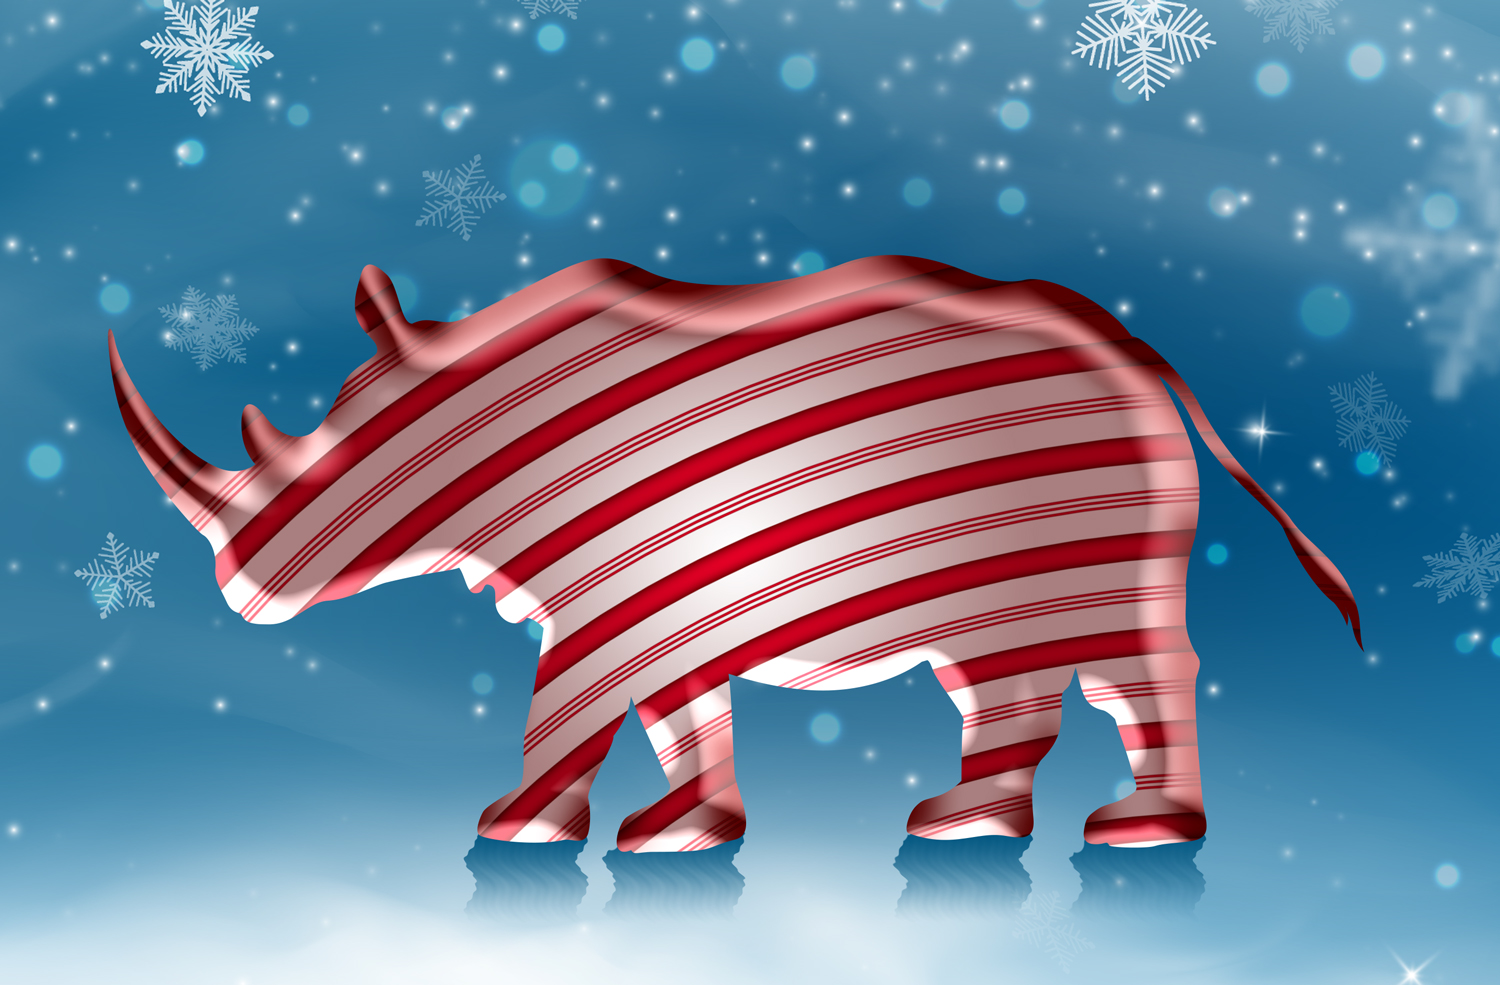 Candy cane rhino with a warped pattern wrapped around it in Photoshop